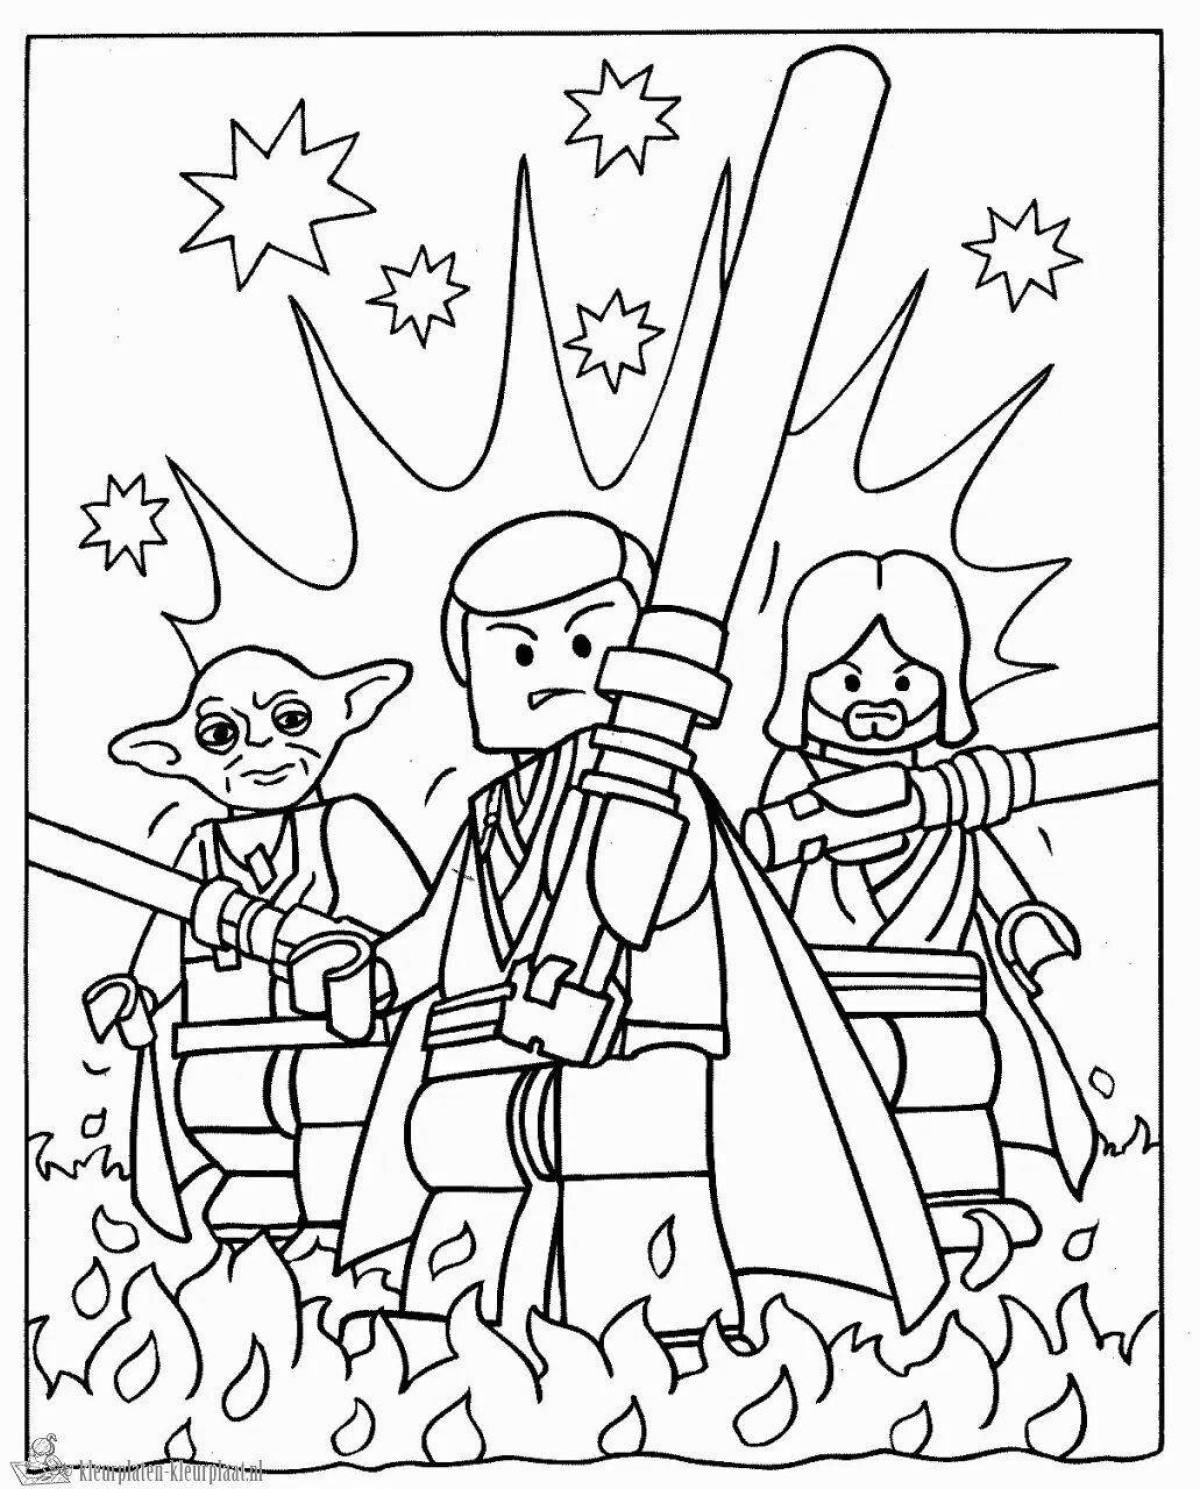 Adorable lego toy soldiers coloring book